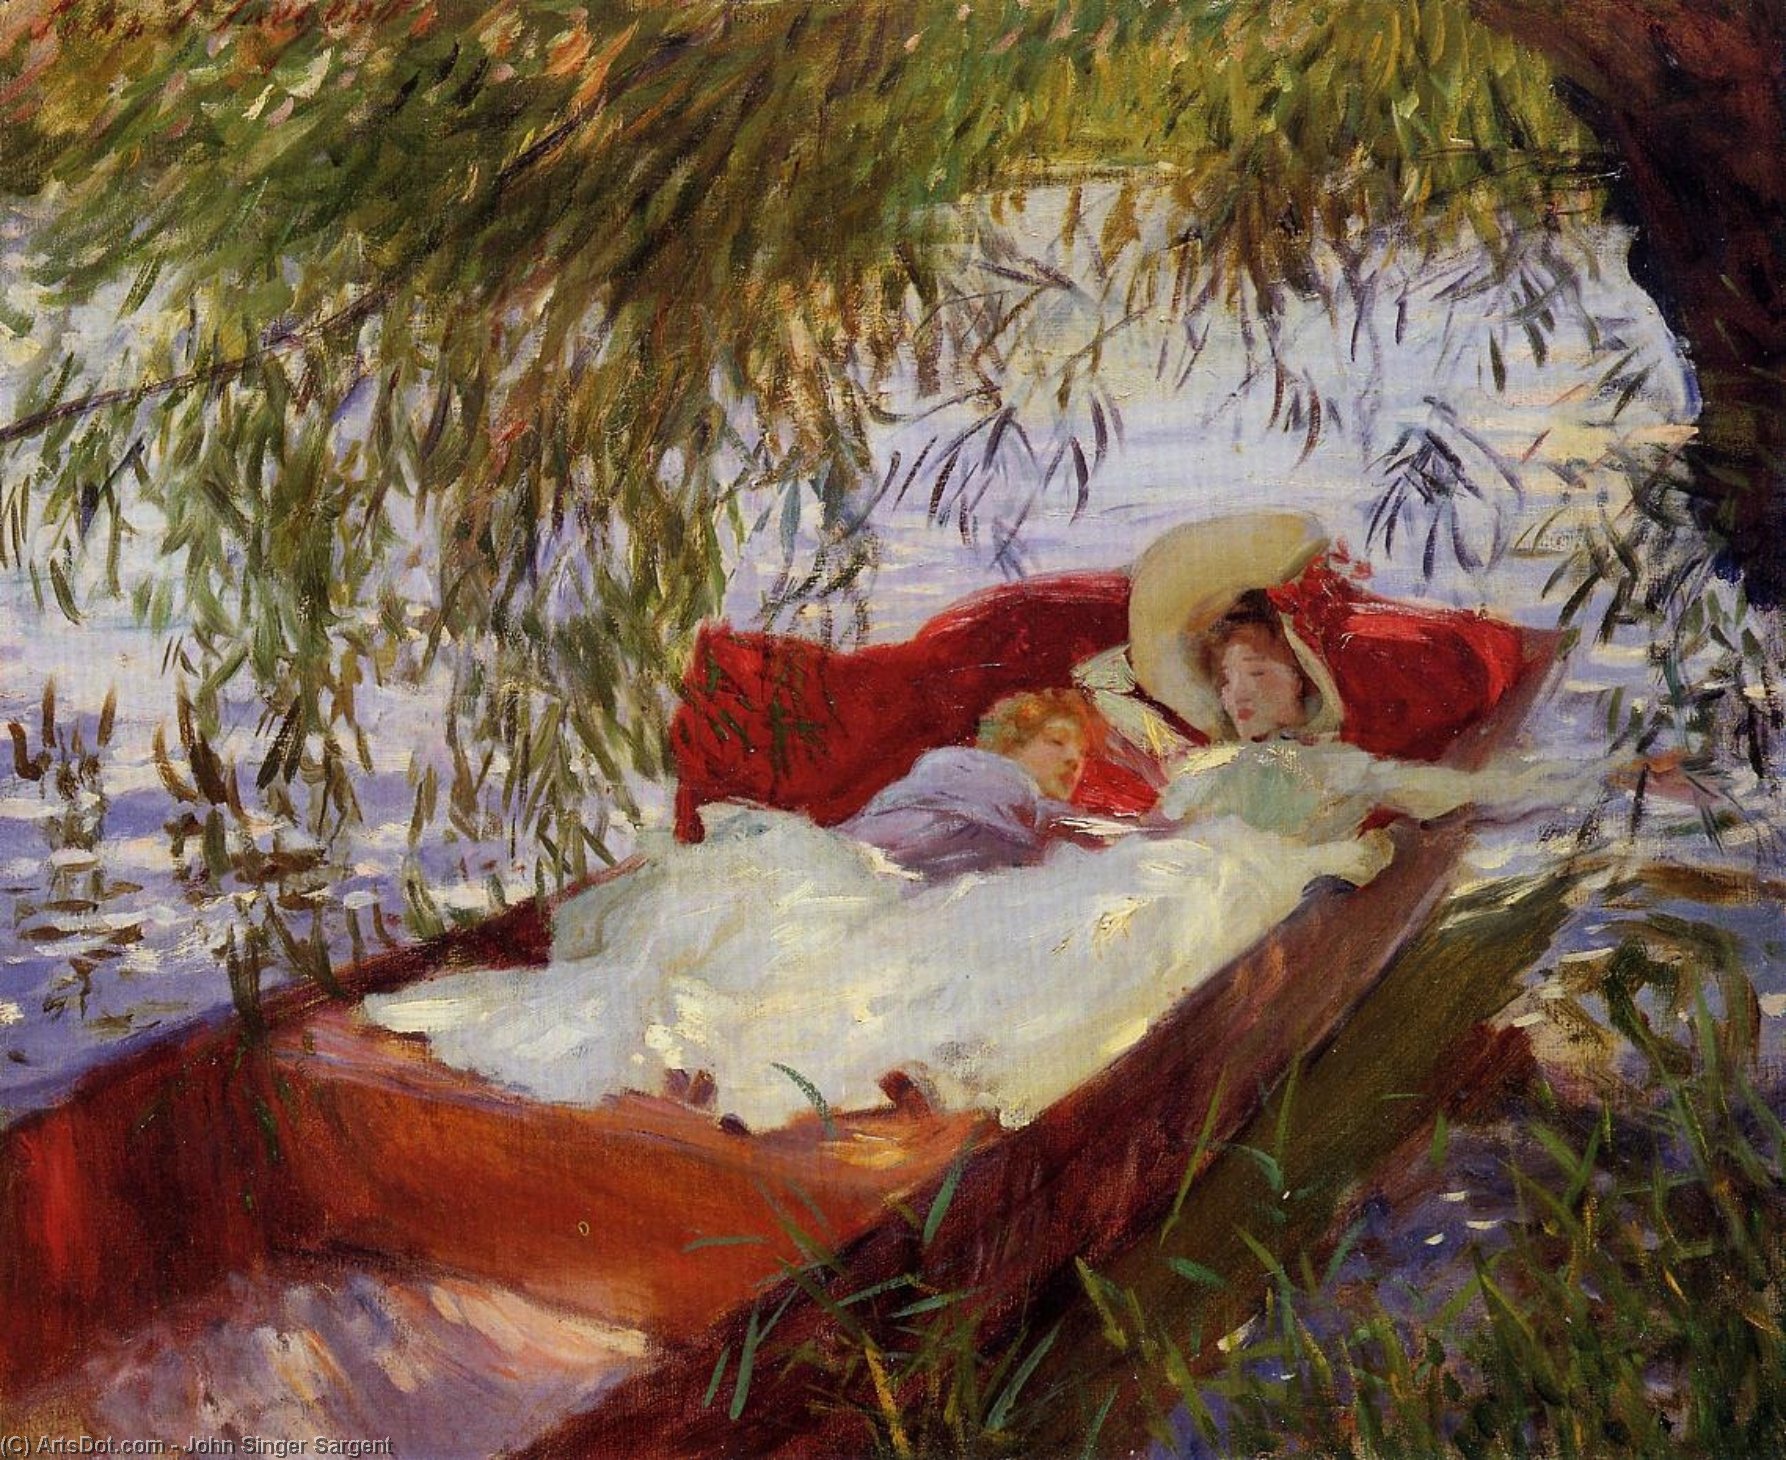 Buy Museum Art Reproductions Two Women Asleep in a Punt under the Willows, 1887 by John Singer Sargent (1856-1925, Italy) | ArtsDot.com